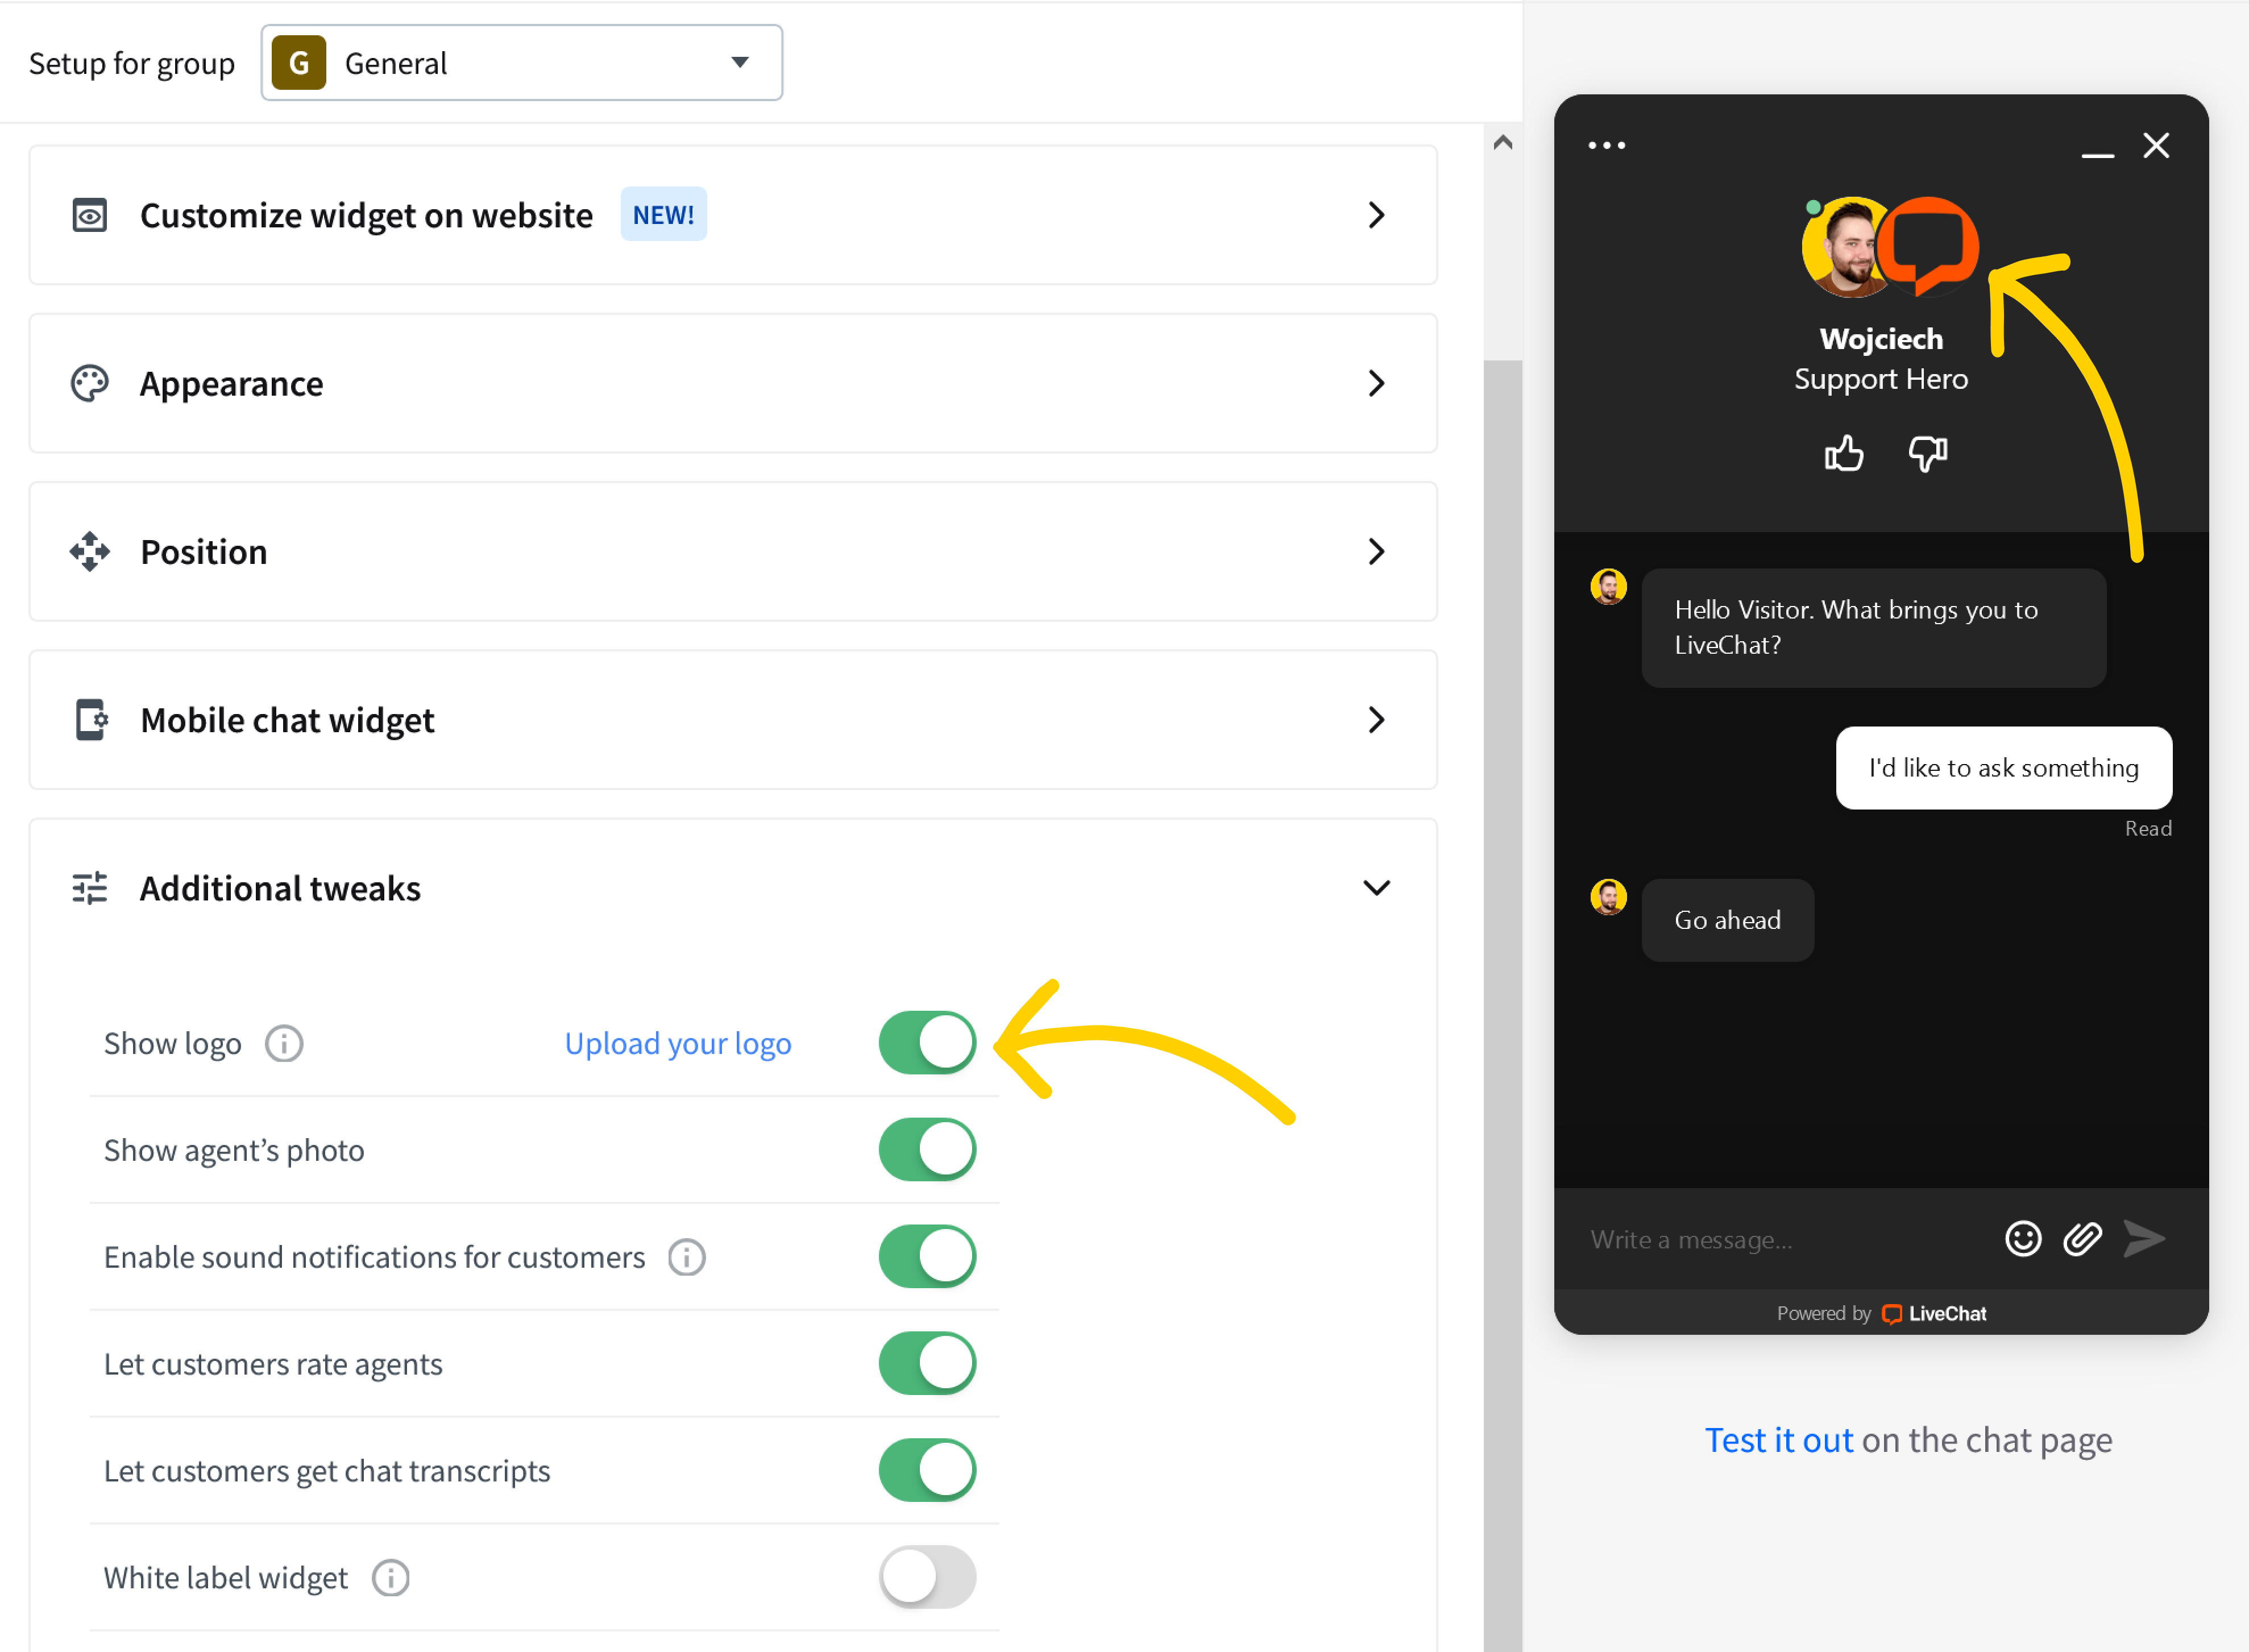 Chat widget configurator: show logo in chat